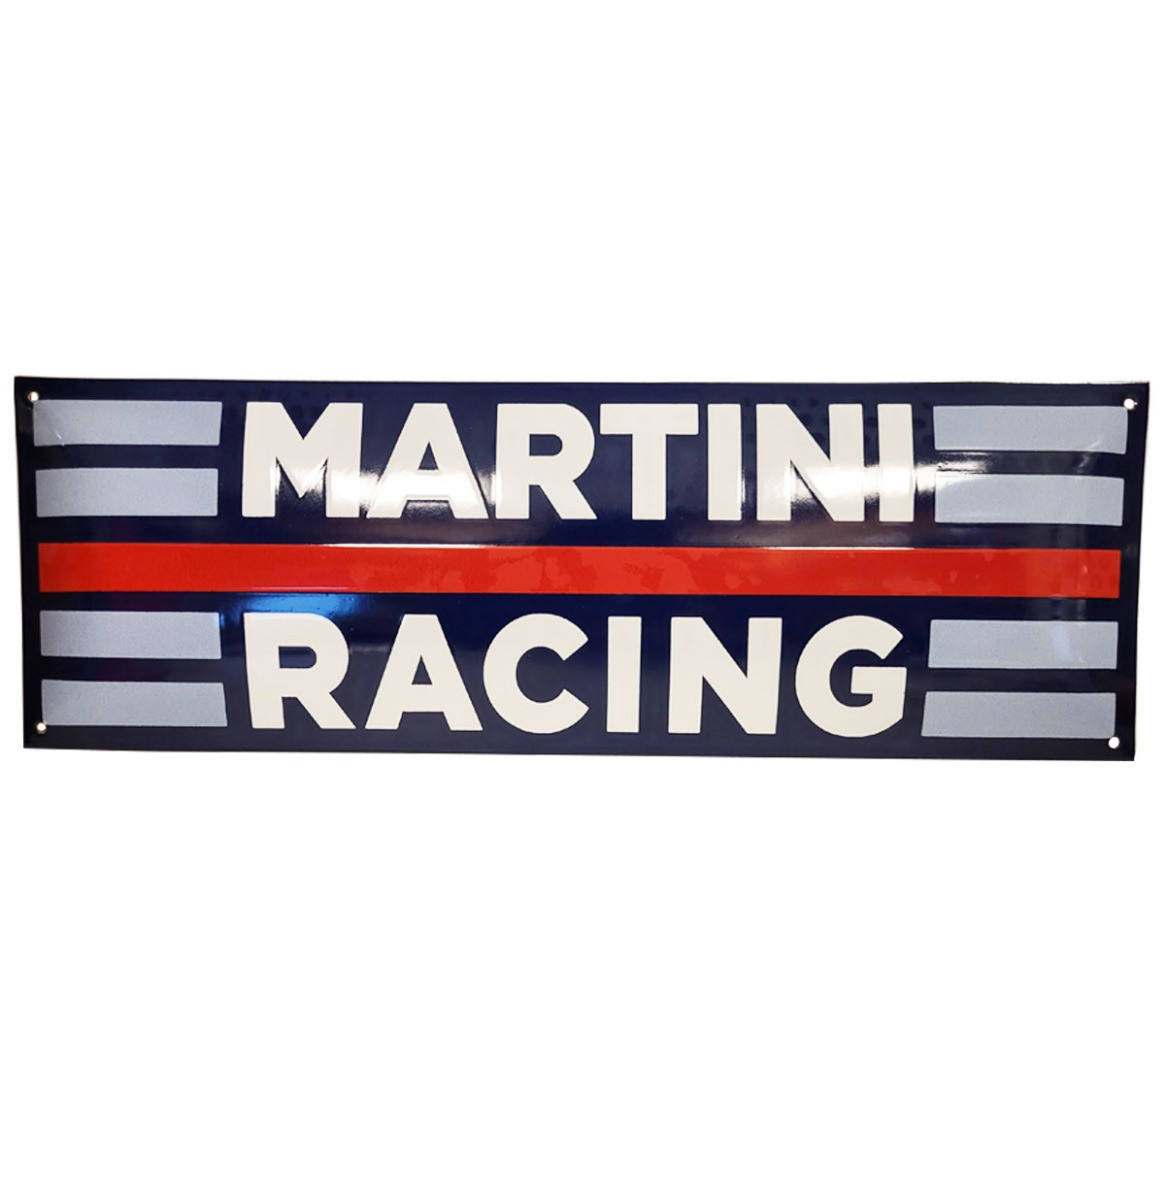 Martini Racing Emaille Bord - 60 x 20 cm